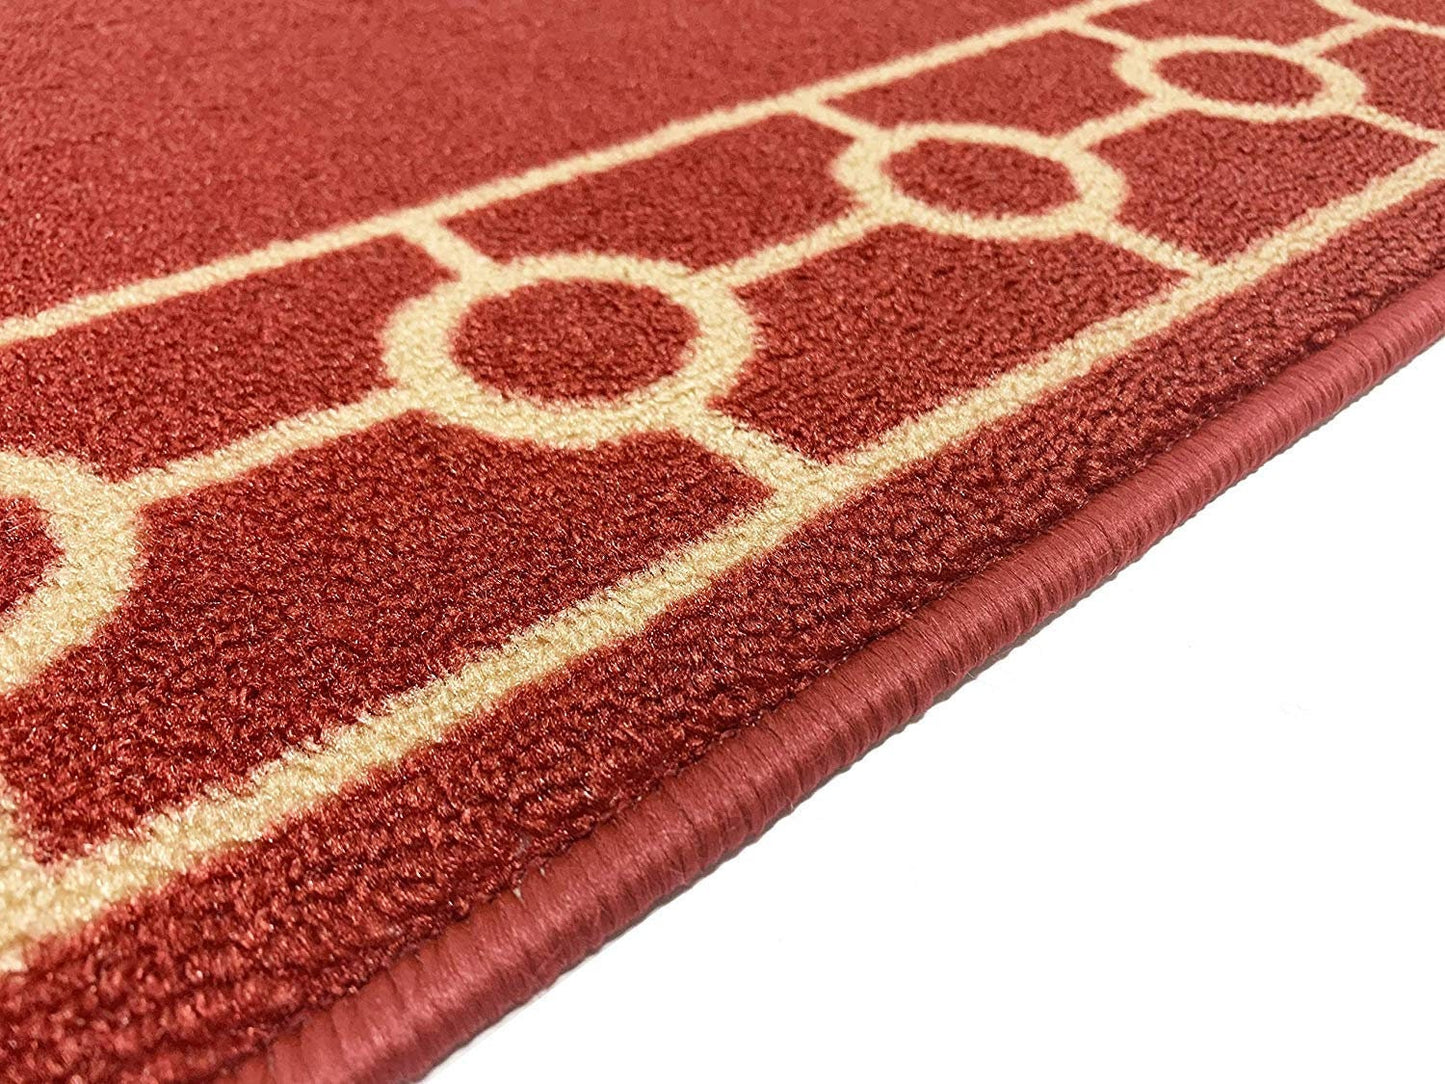 Custom Size Runner Rug Chain Border Red with Beige Border Skid Resistant Runner Rug 26 Inches and 32 Inches WideCustomize By Feet